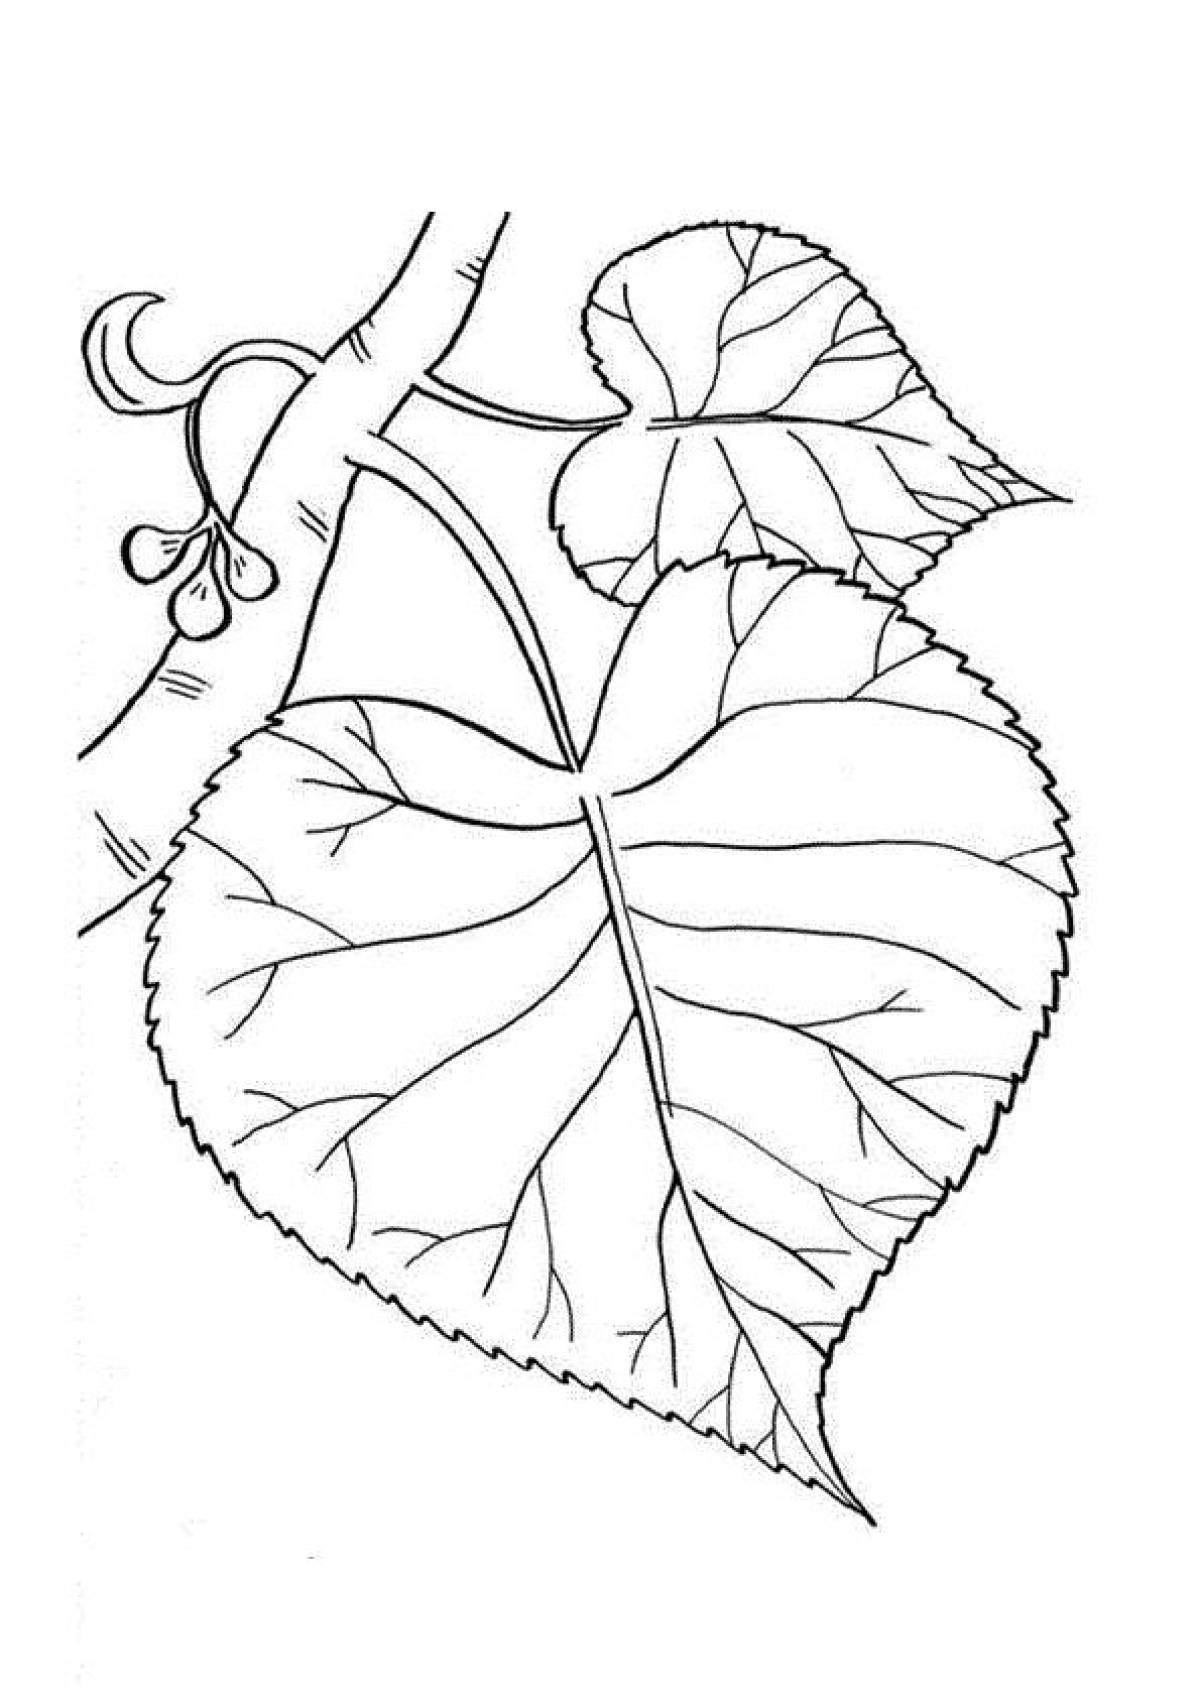 Two linden leaves